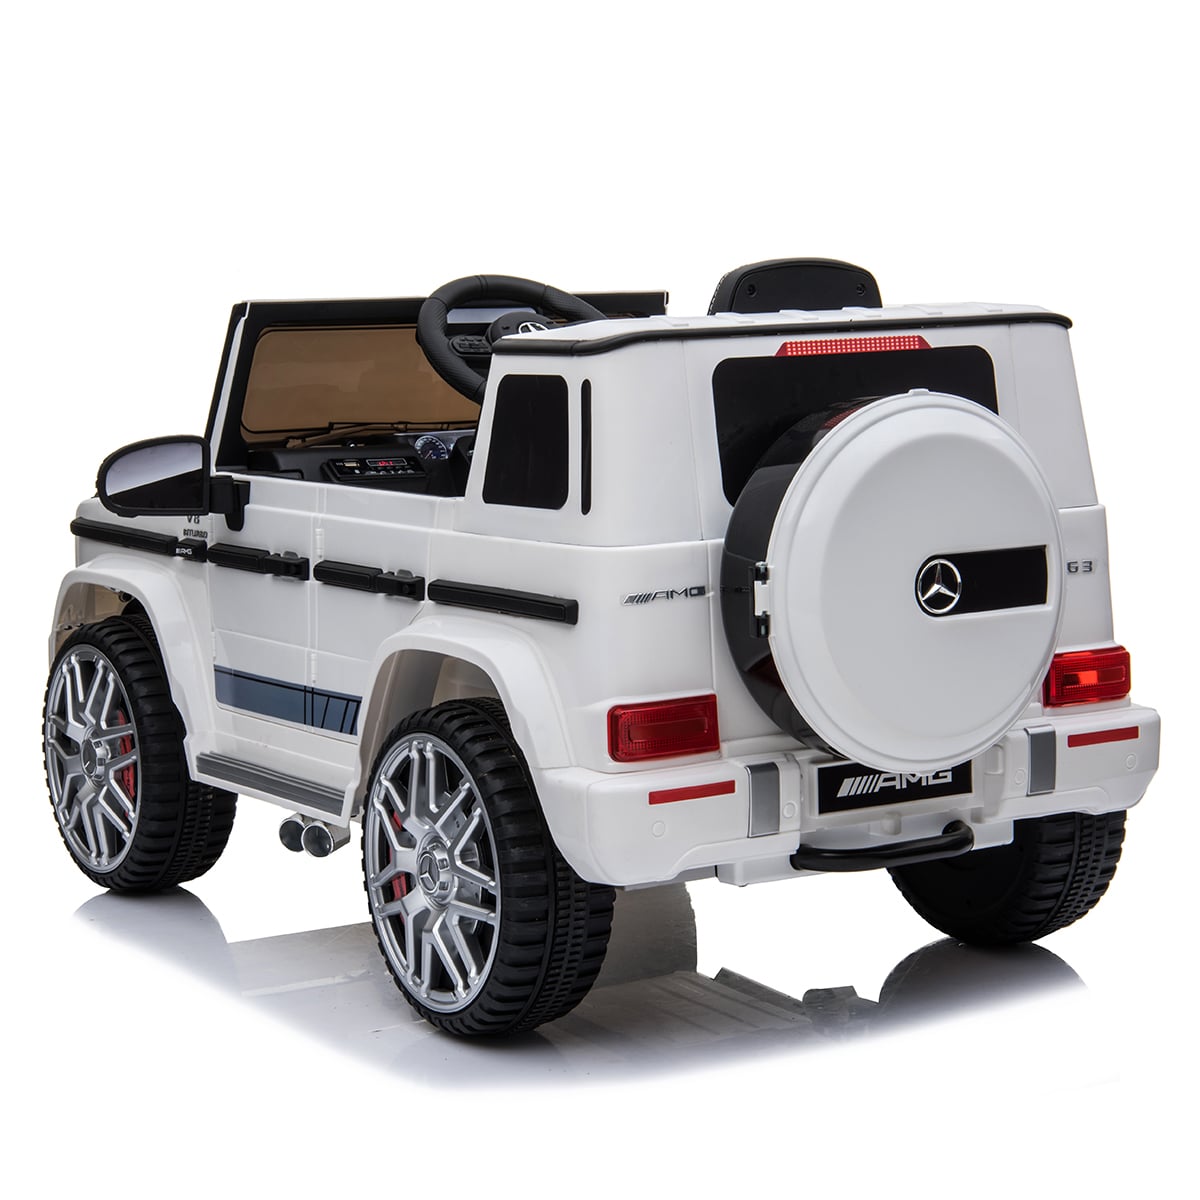 "Electric Ride-on White Mercedes-Benz G63 AMG from KidsCar.co.uk, equipped with parental remote controls."